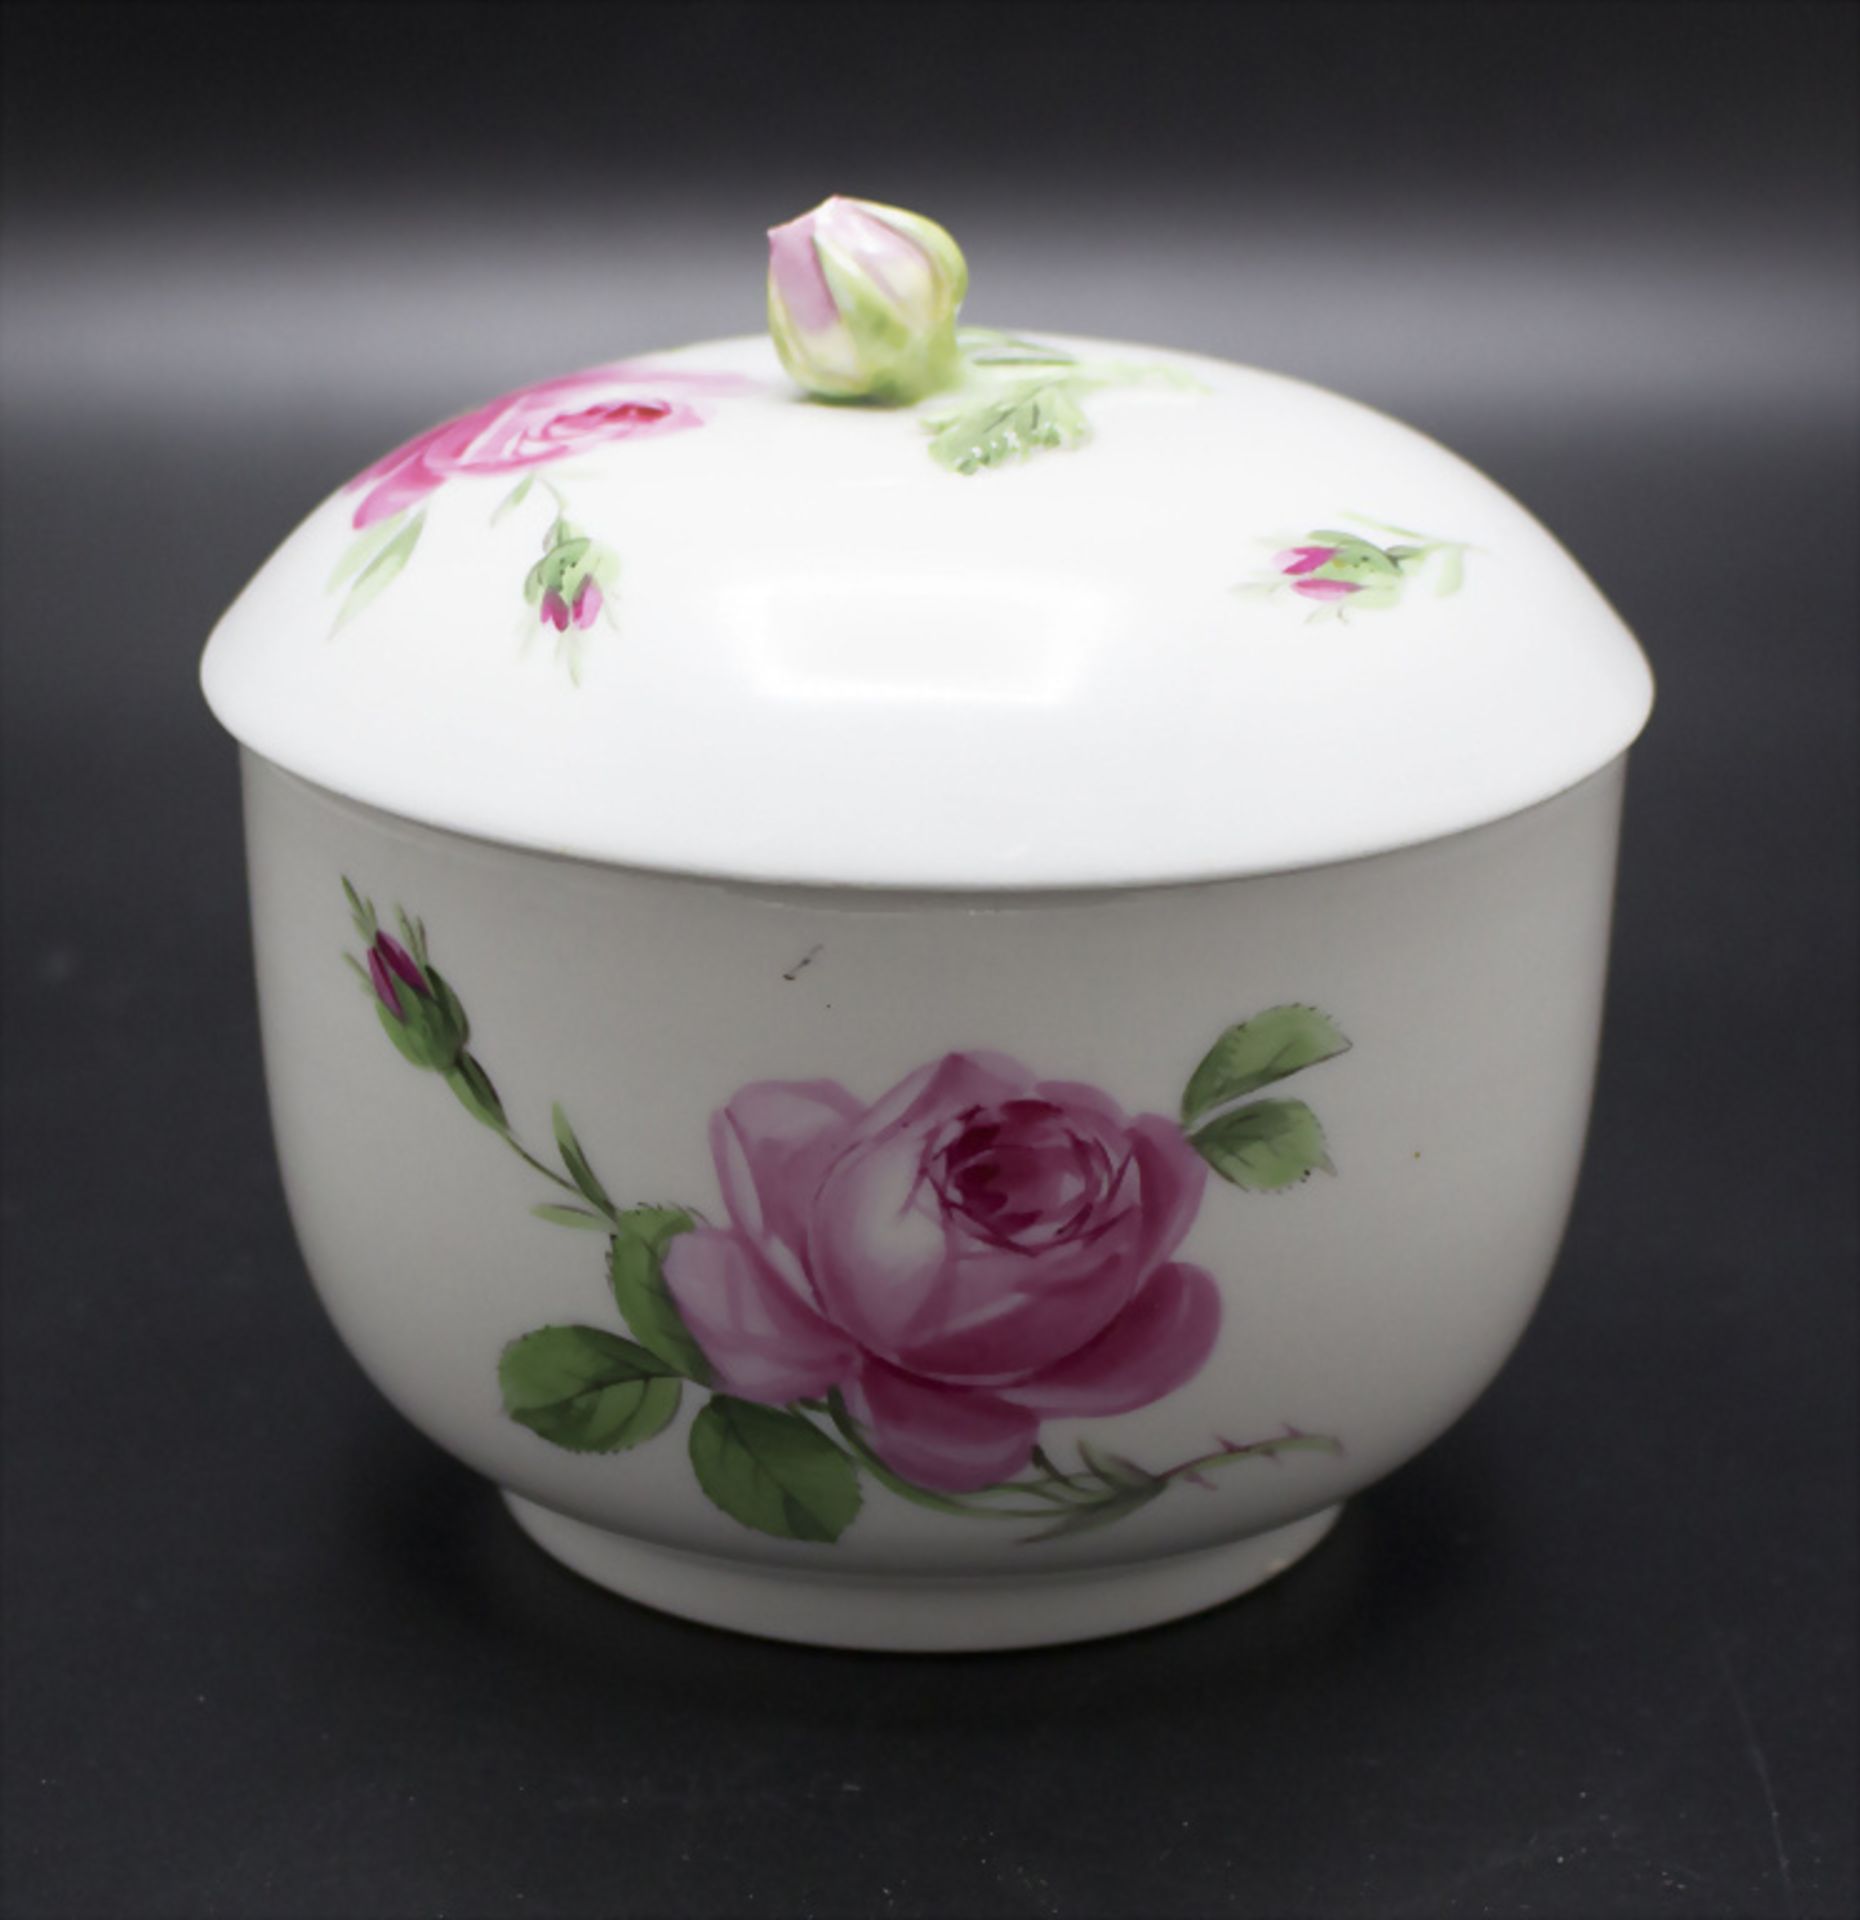 Zuckerdose 'Rote Rose' / A lidded sugar bowl with roses, Meissen, 2. Hälfte 19. Jh.